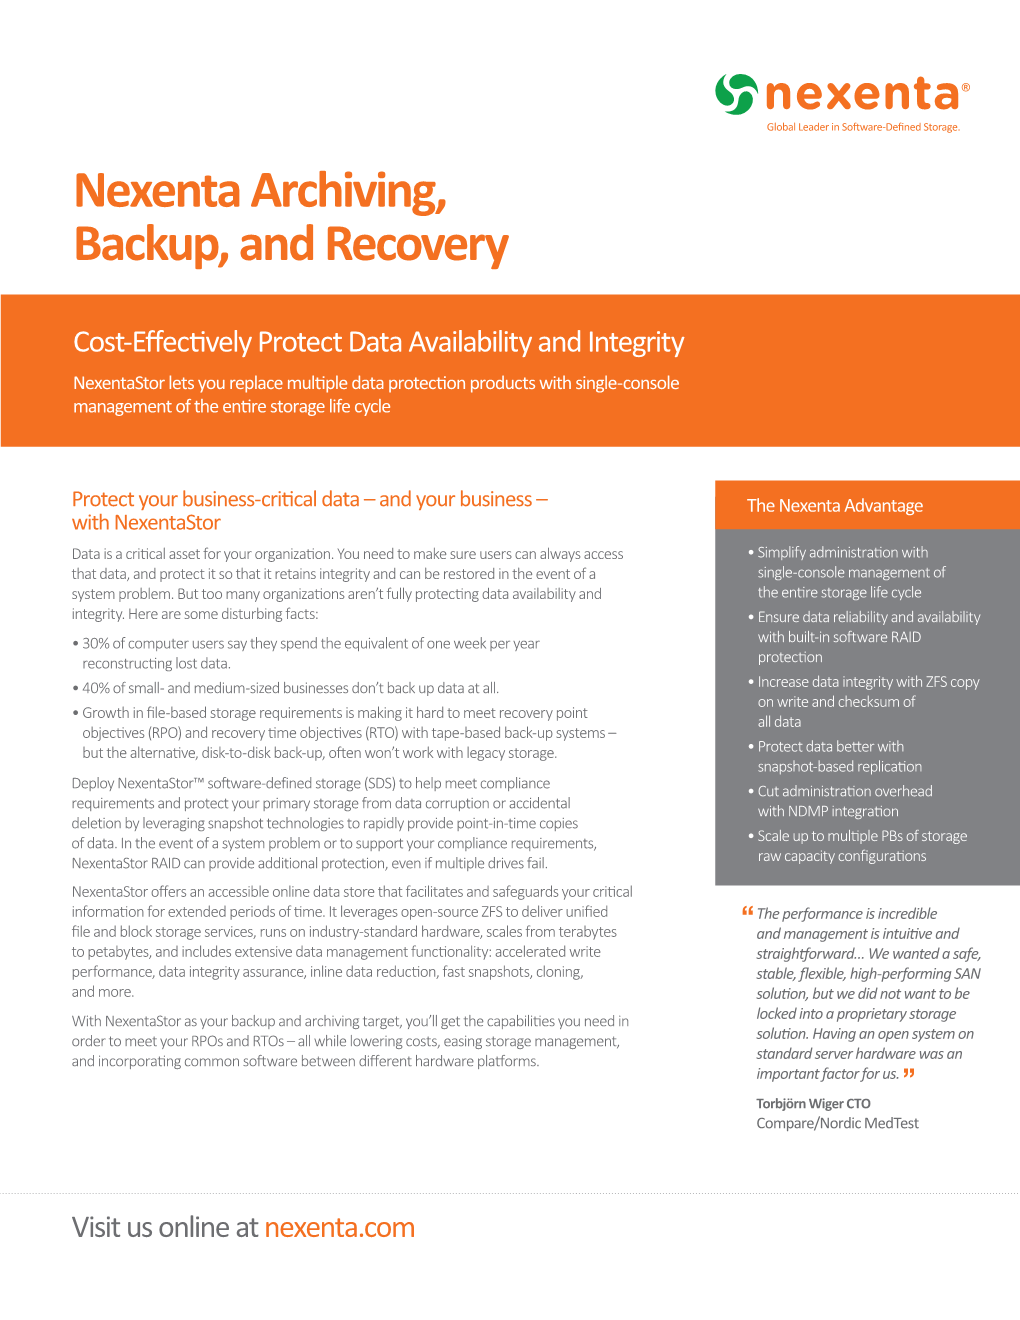 Nexenta Archiving, Backup, and Recovery